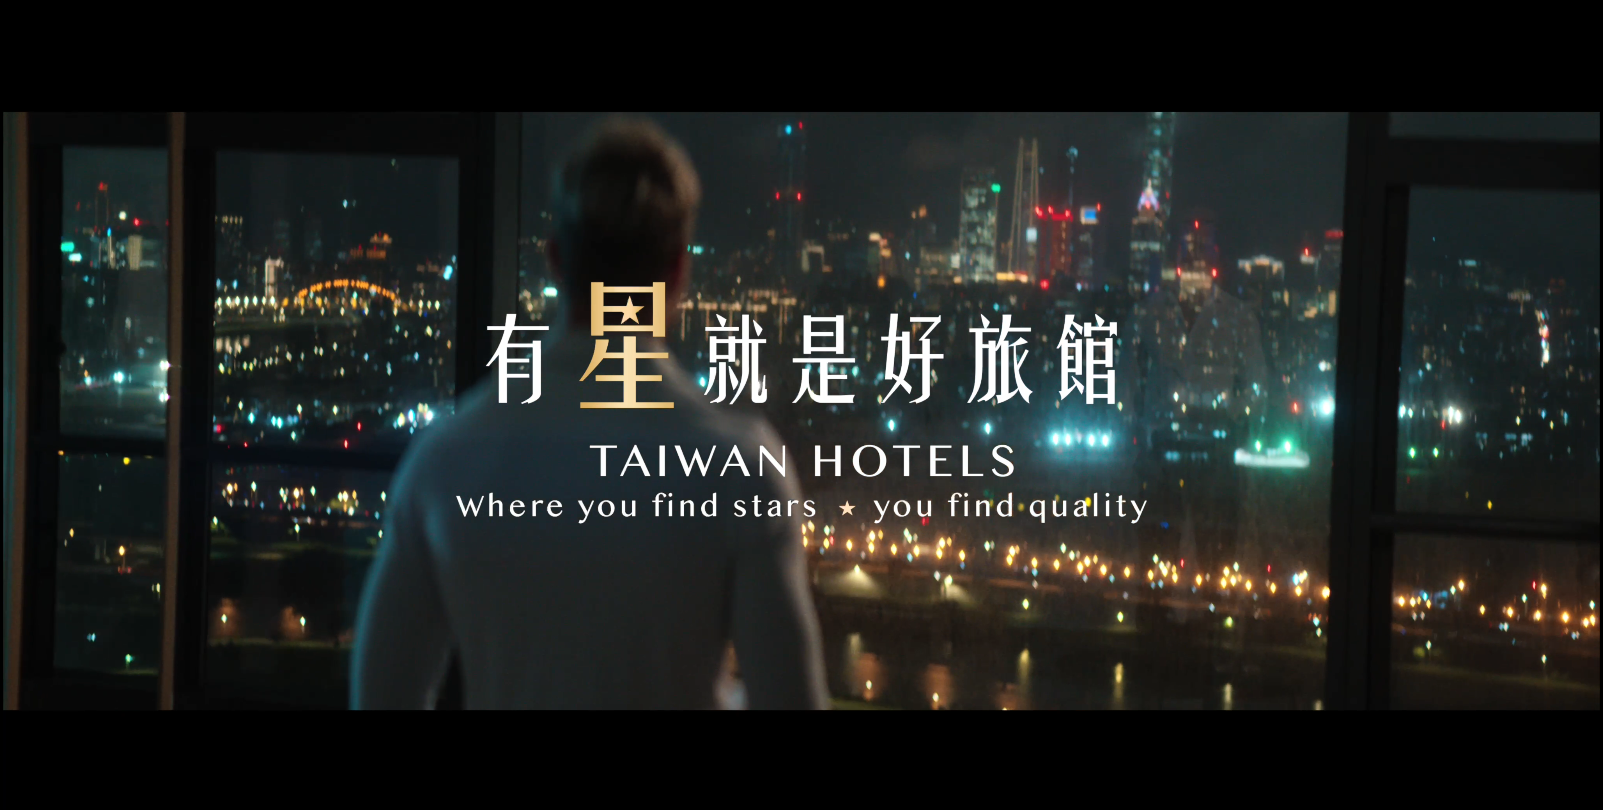  TAIWAN HOTELS - Where you find stars, you find quality (Full Ver.)